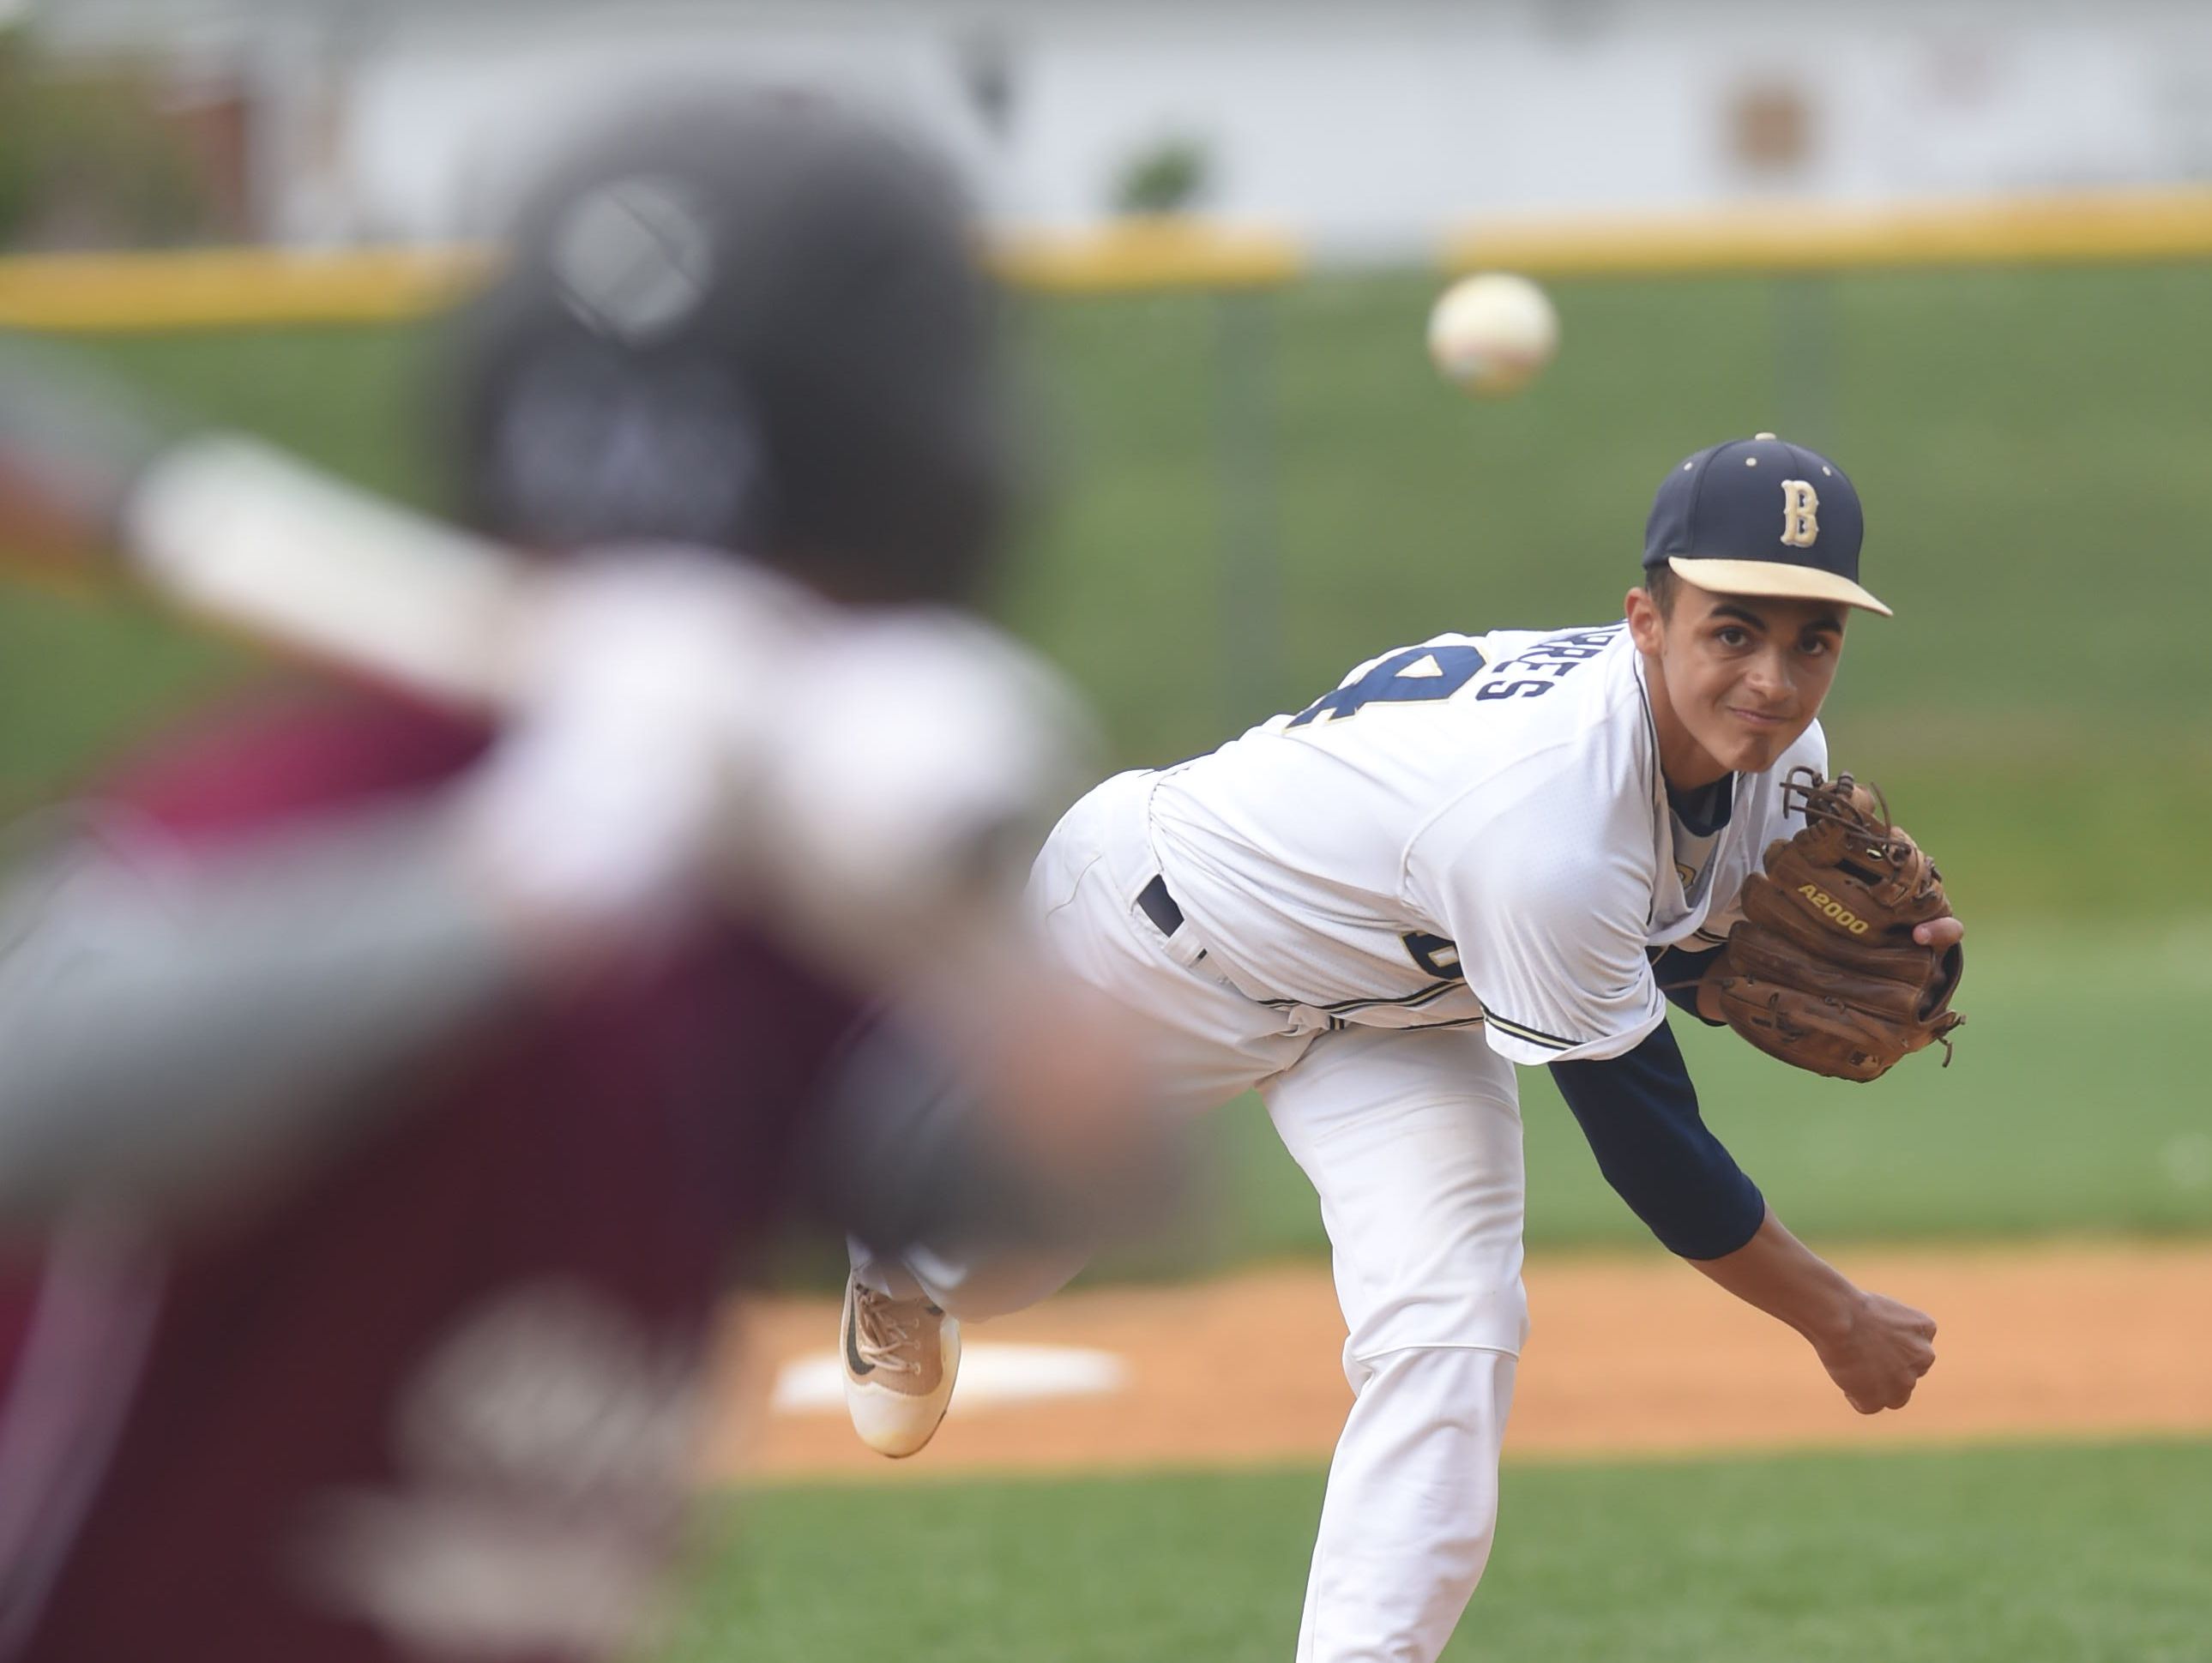 Beacon High School's Lenny Torres pitches to a hitter from Ossining on April 29 at Beacon.